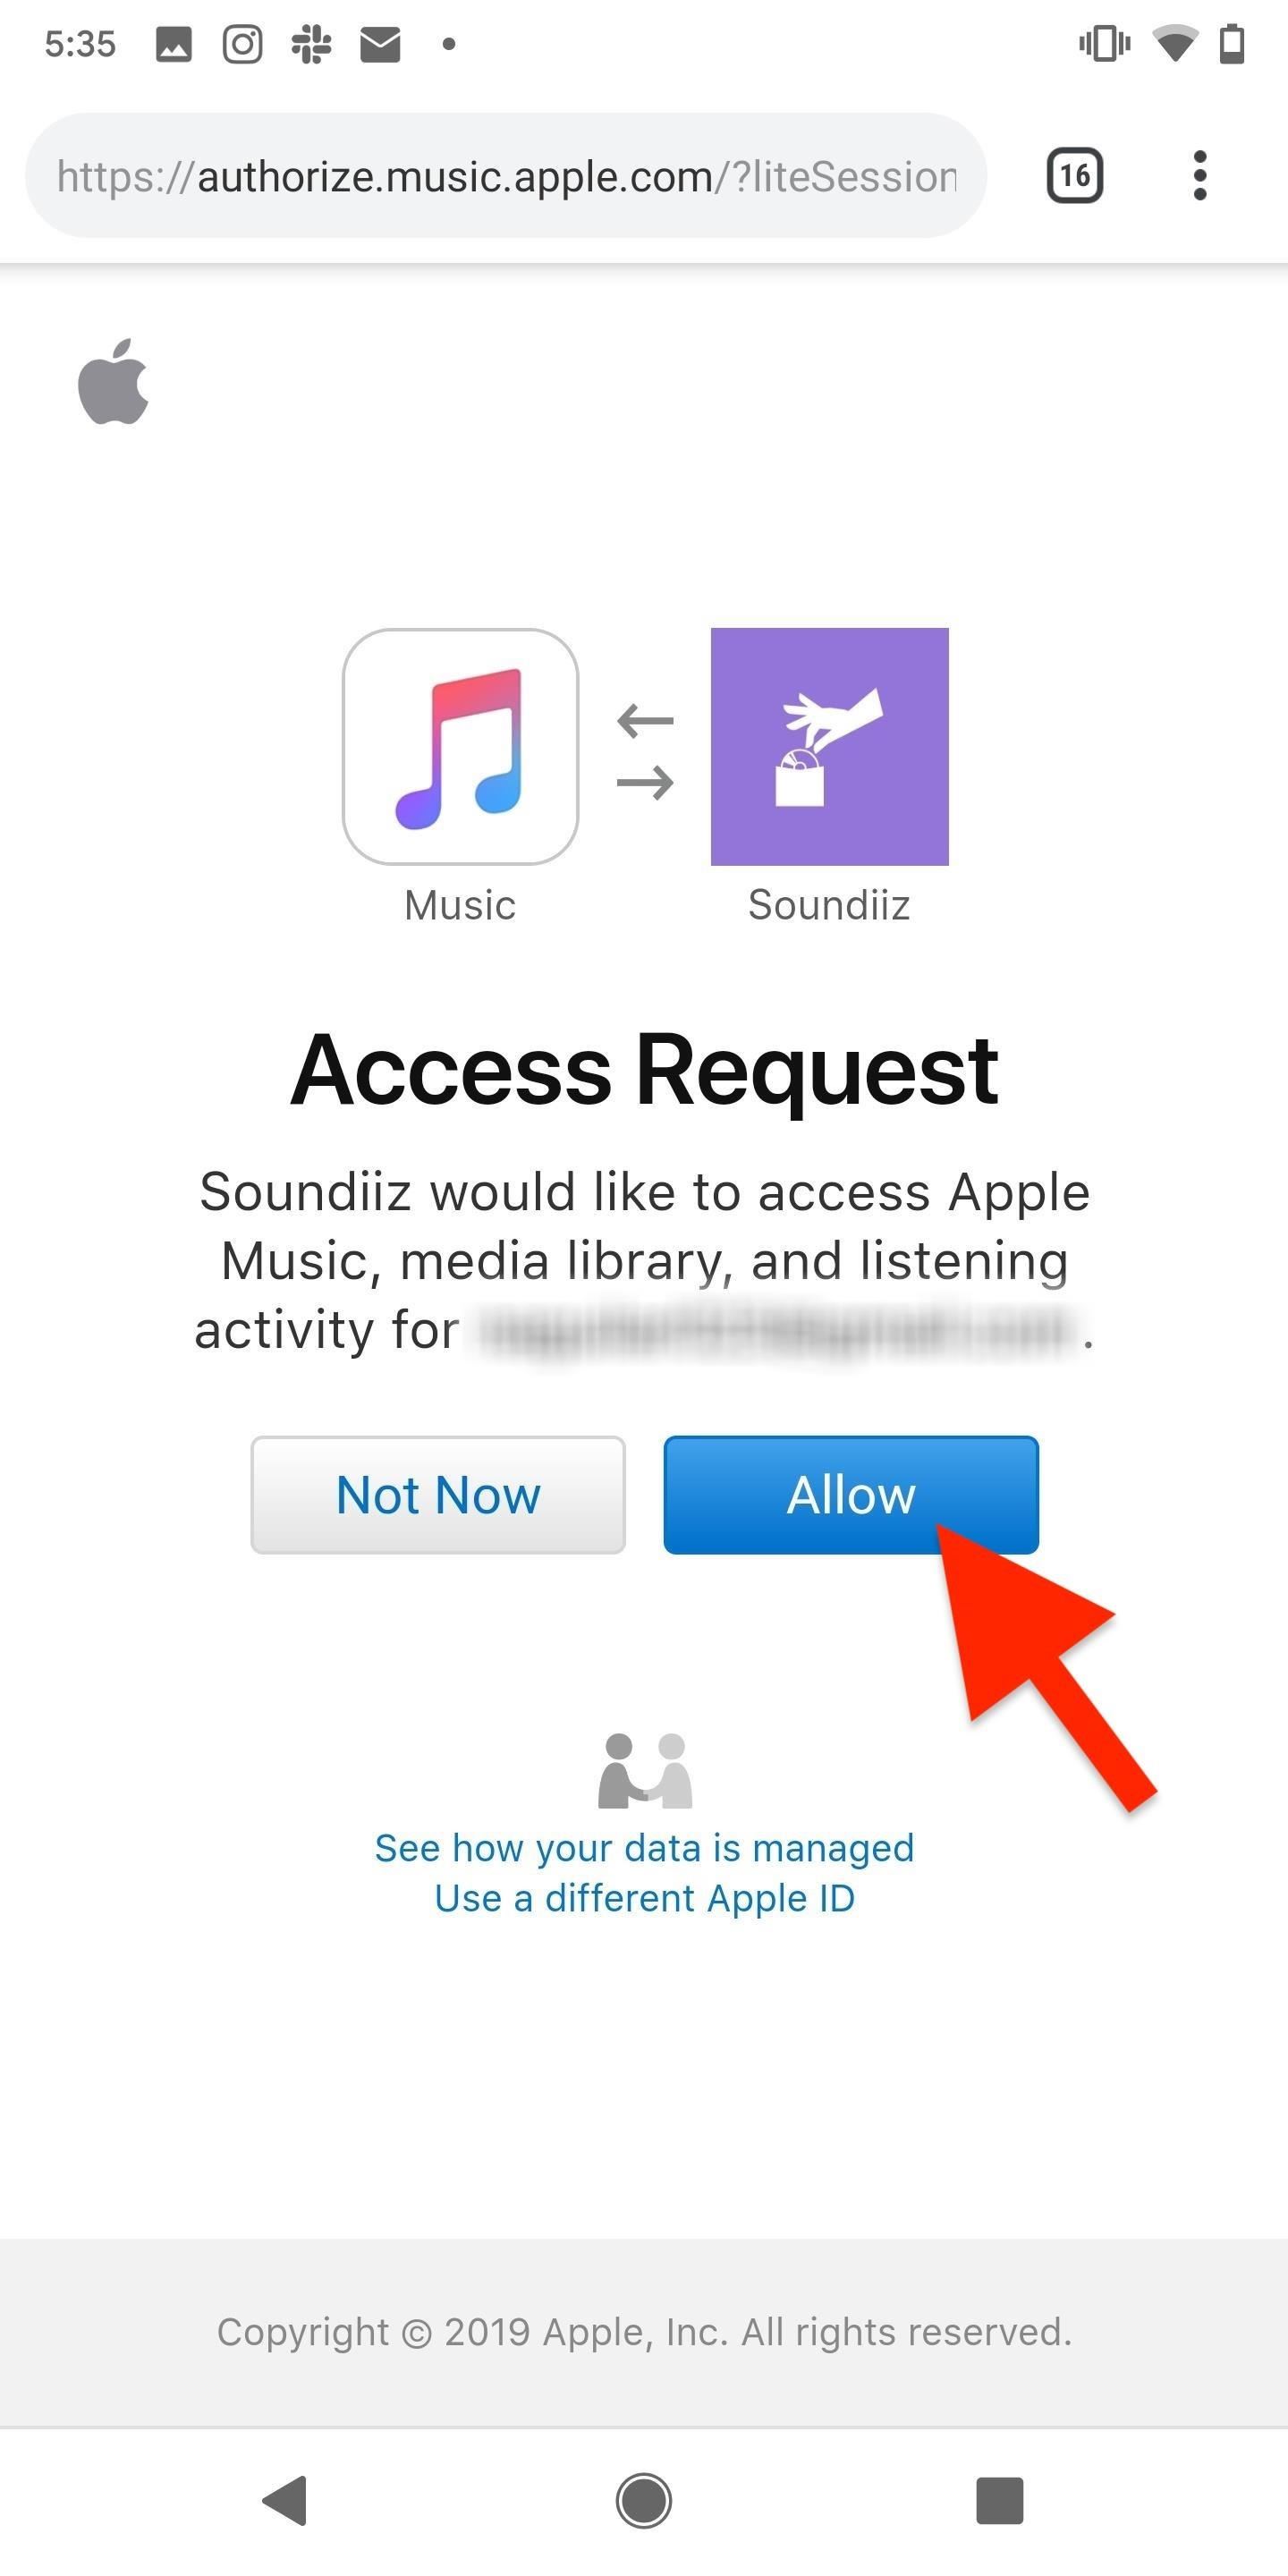 How to Transfer Your Spotify Playlists to Apple Music from an iPhone or Android Phone